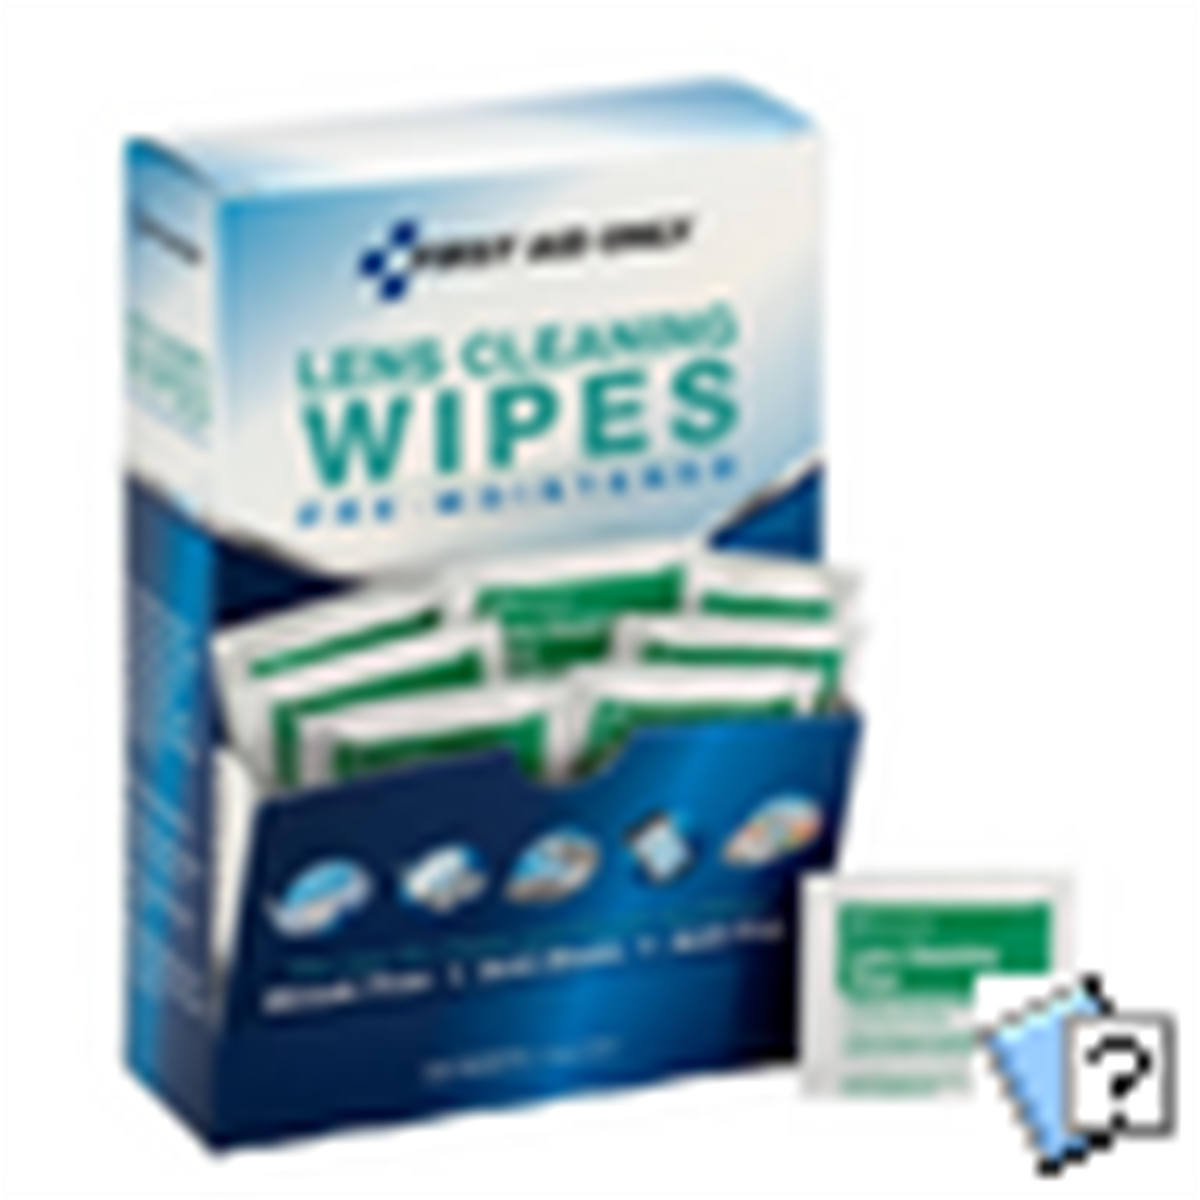 Lens Cleaning Wipes 100/box